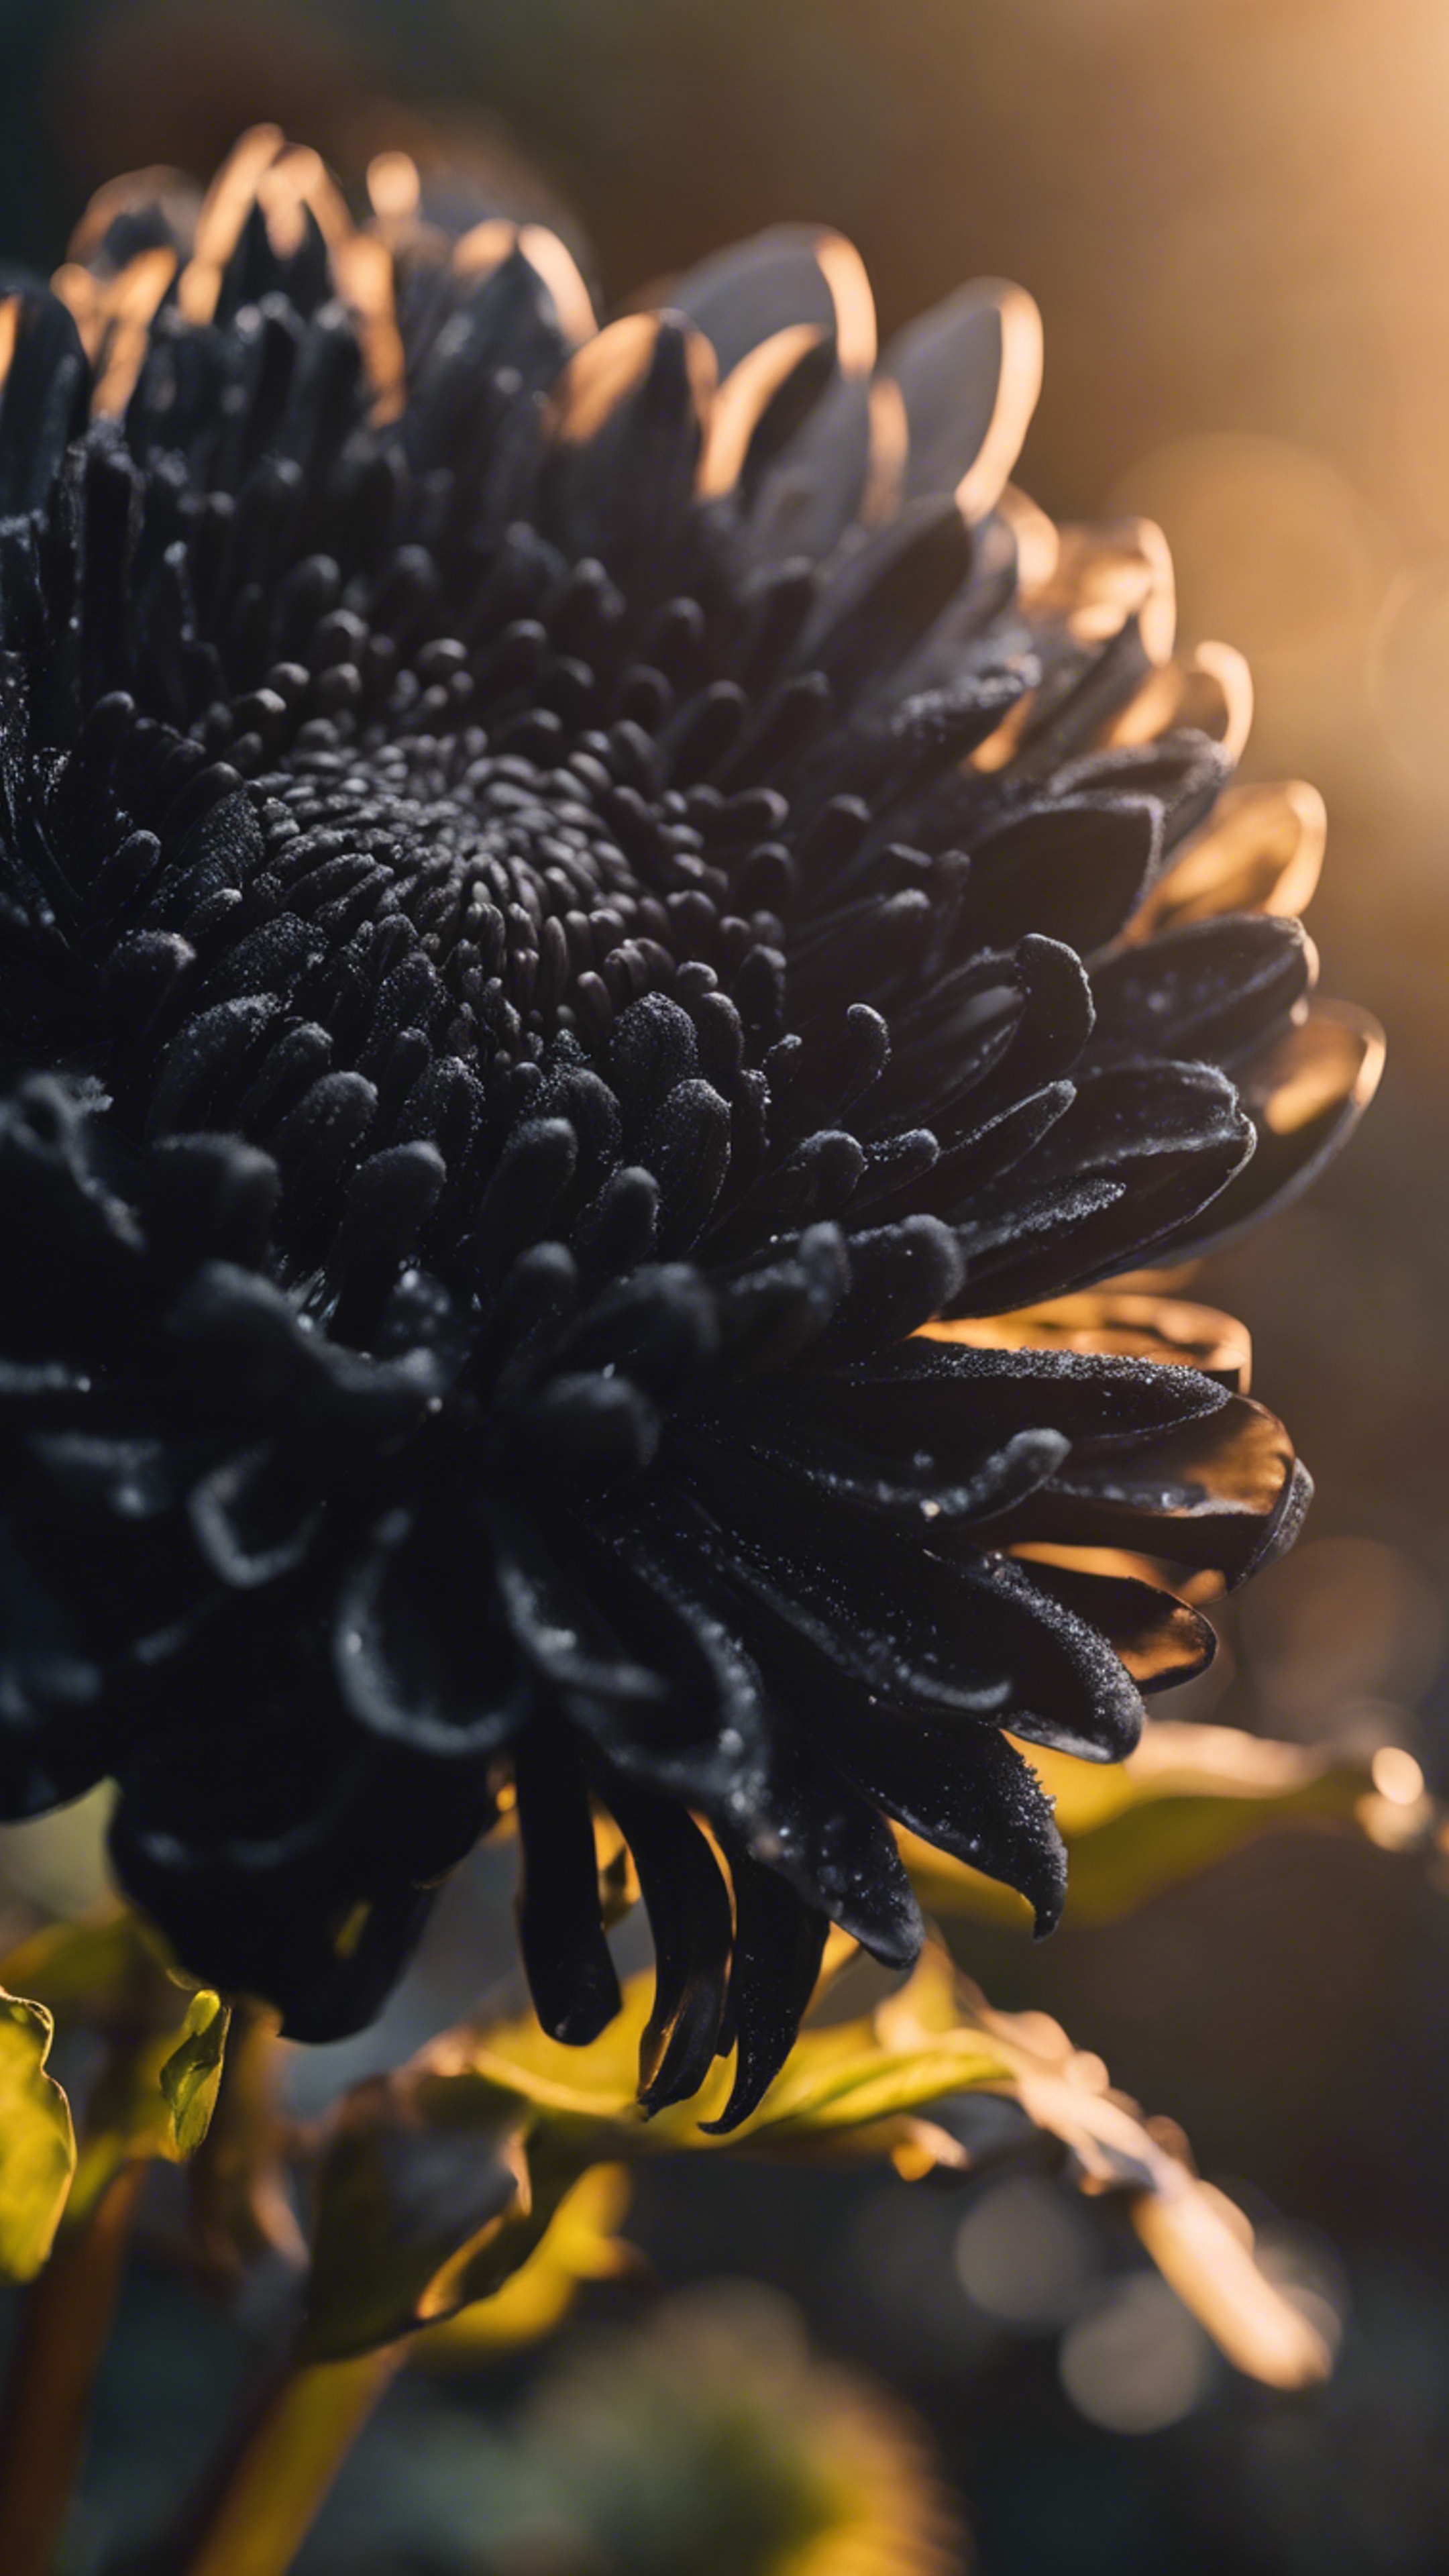 An ethereal black chrysanthemum with intricate petals against a backdrop of the setting sun. کاغذ دیواری[4b40c3df292a42548d77]